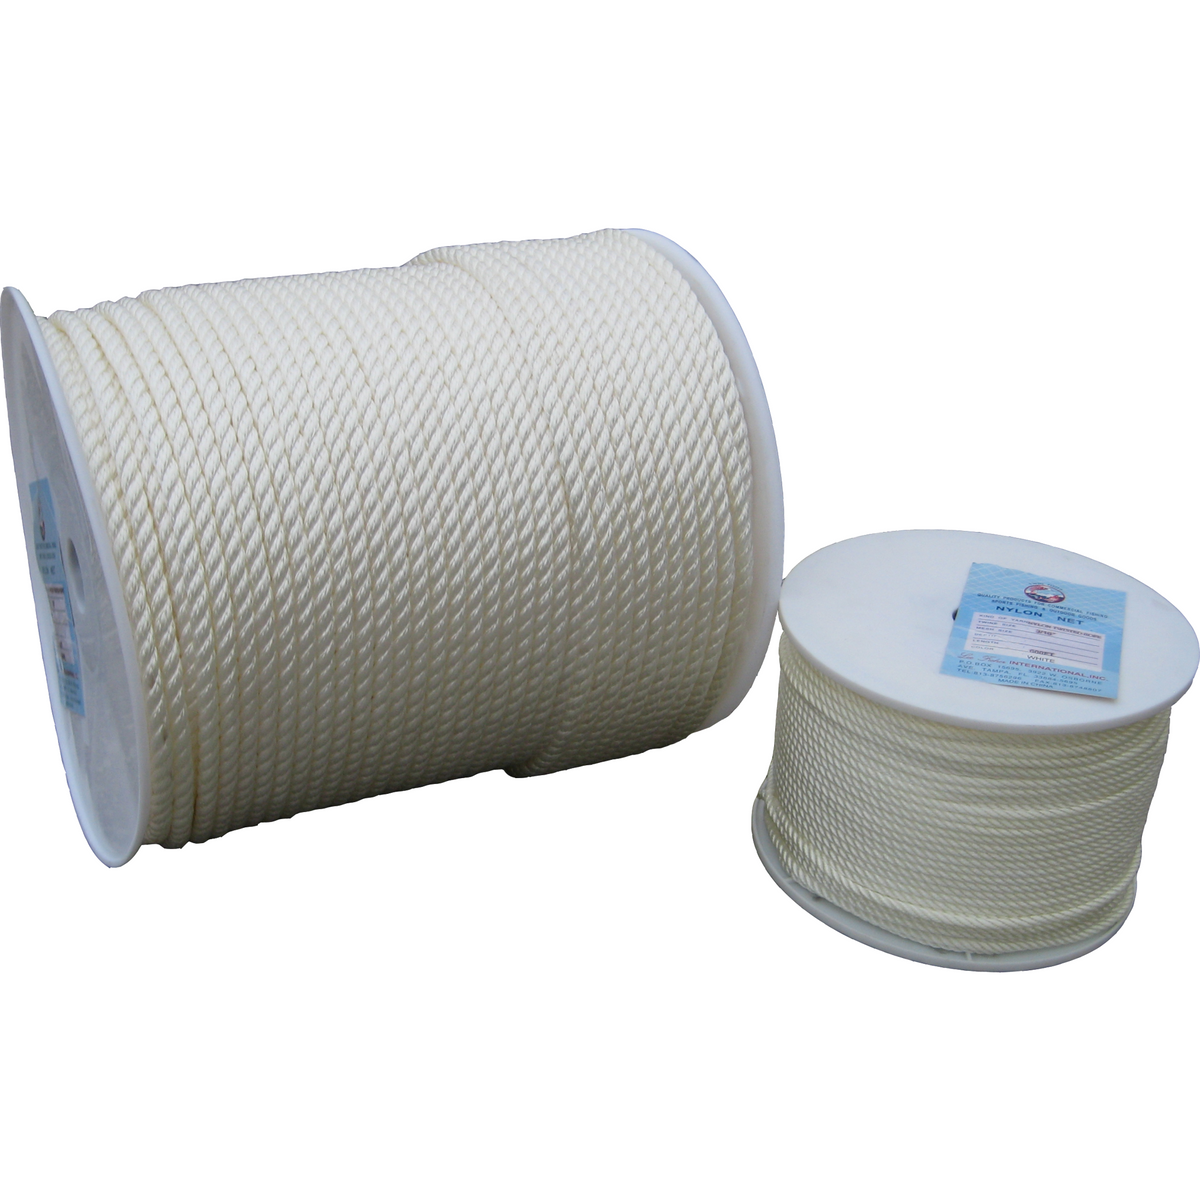 3 8 inch x 600 ft. White 3-Strand Twisted Nylon Rope from Erin Rope Corp.